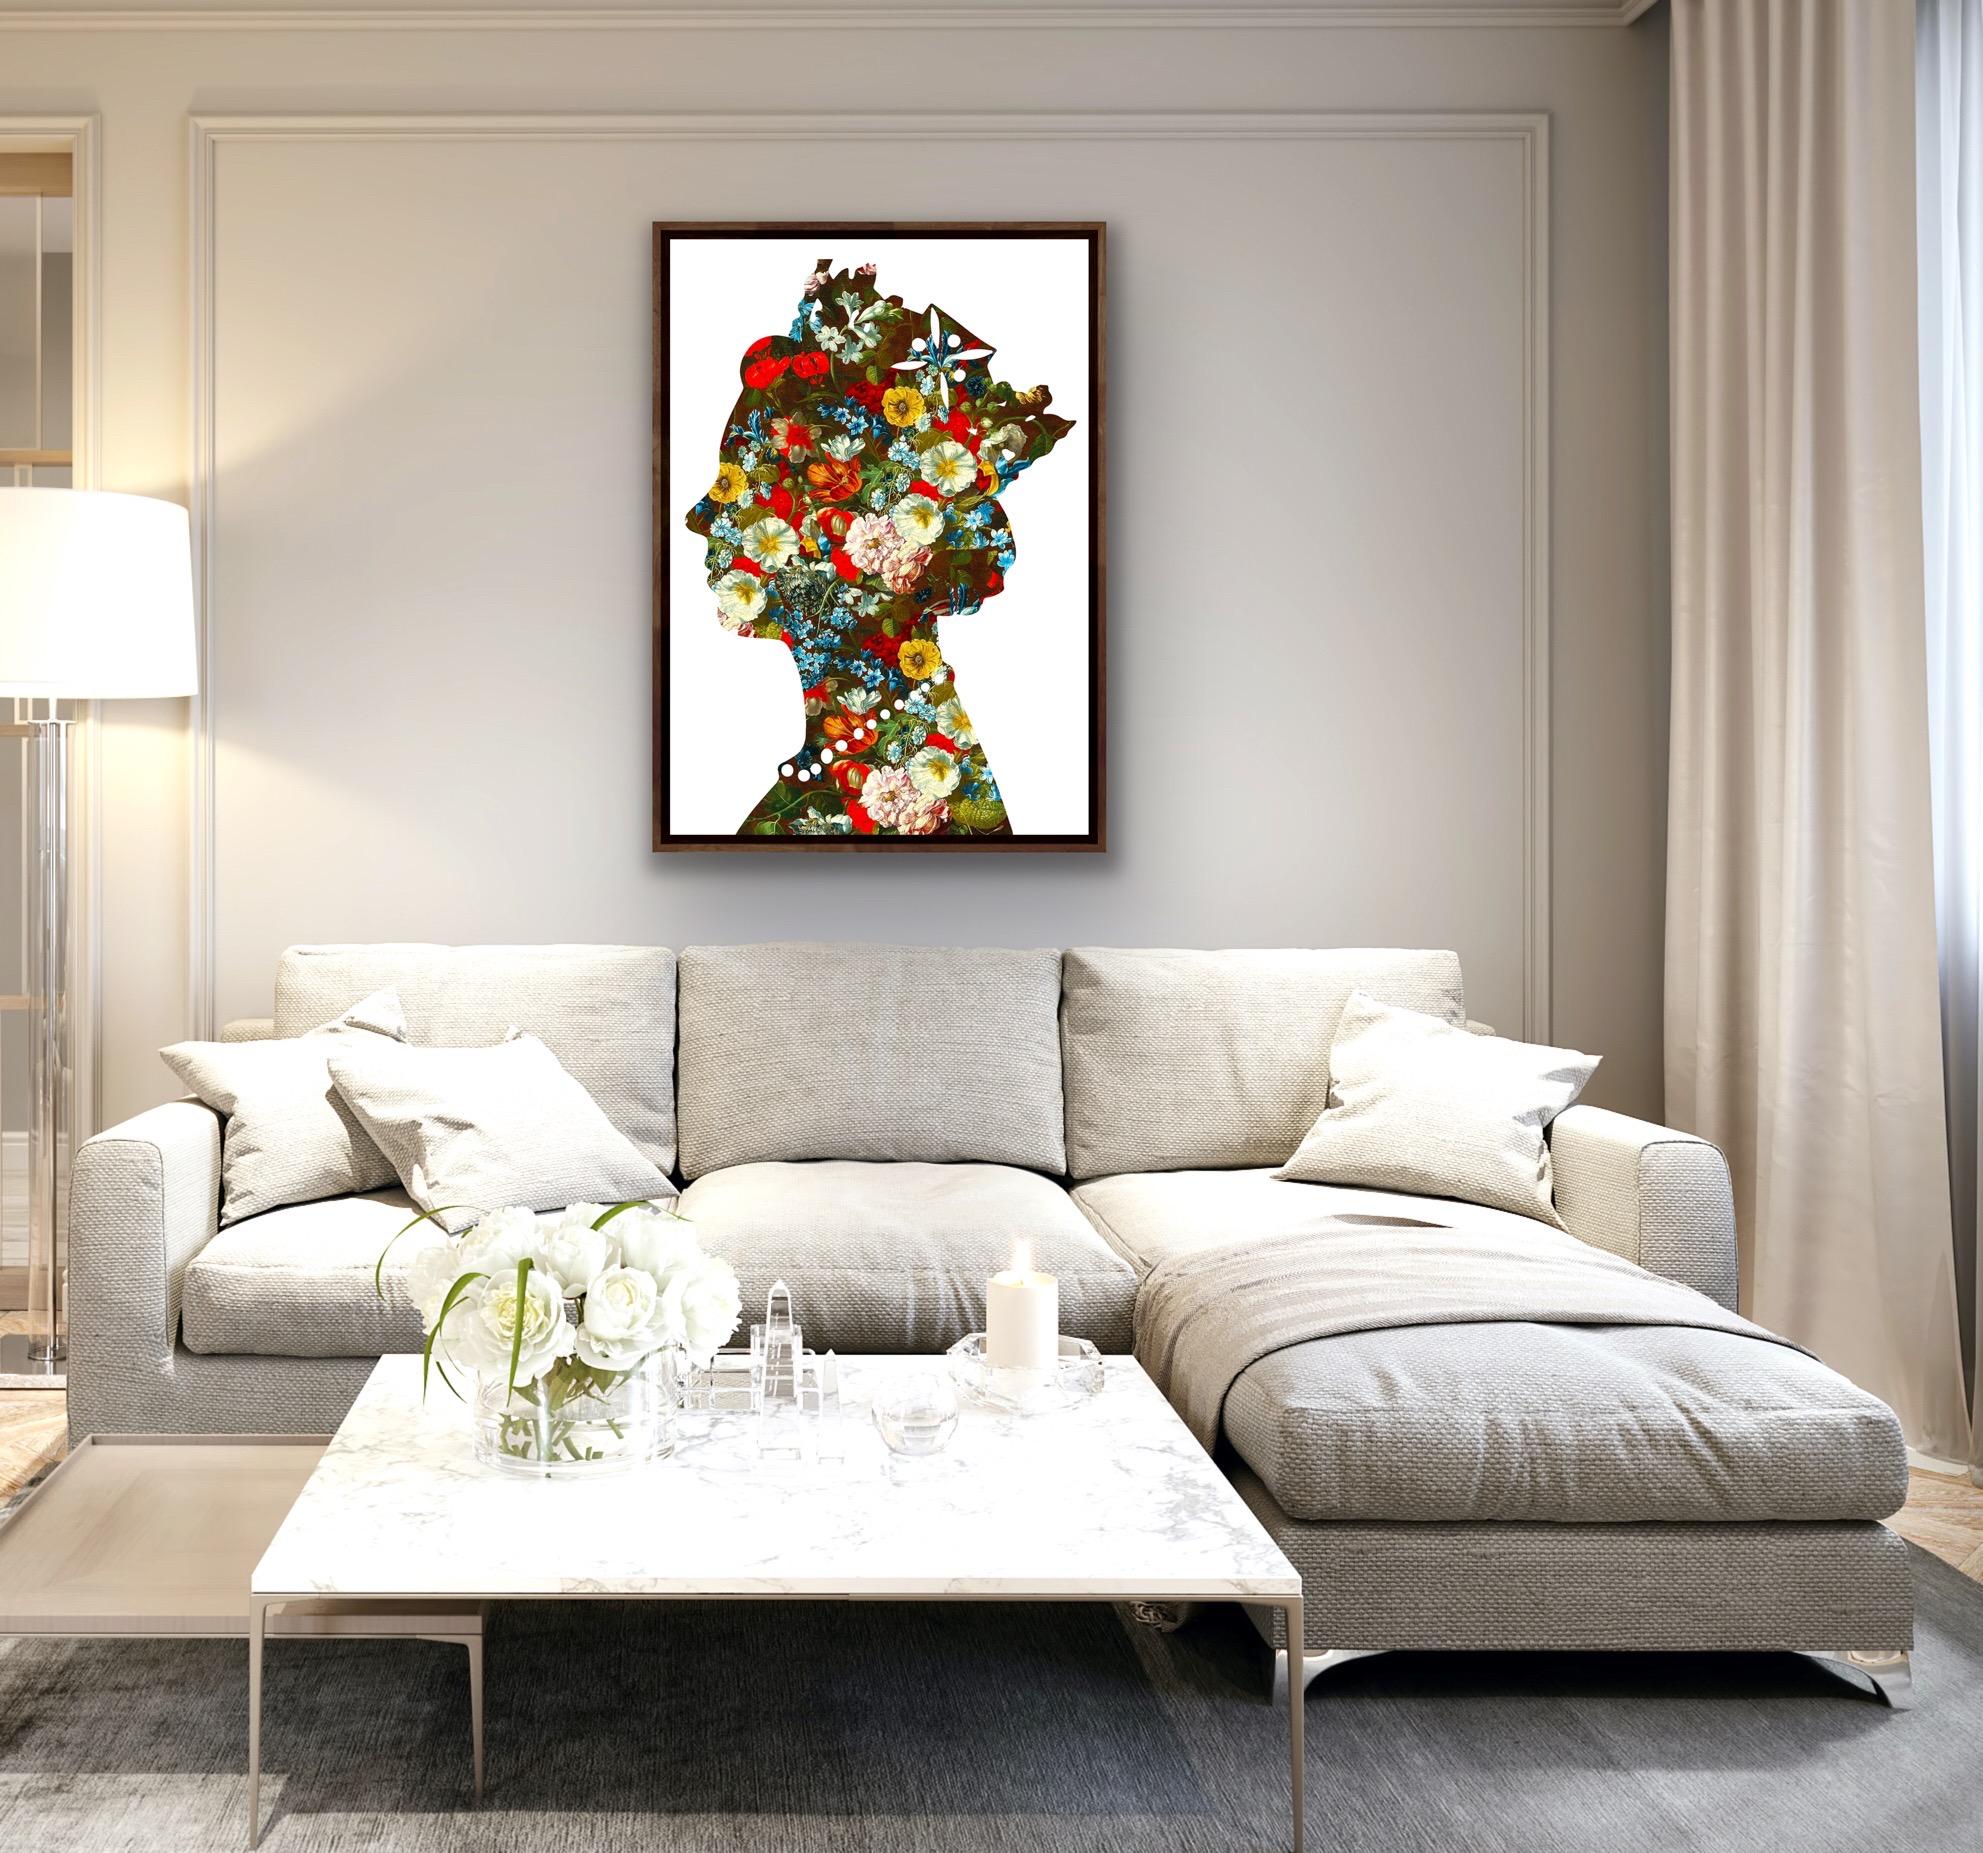 One Queen (02), Original Queen Art, Celebrity Art, Floral Digital Painting - Brown Still-Life Painting by Agent X